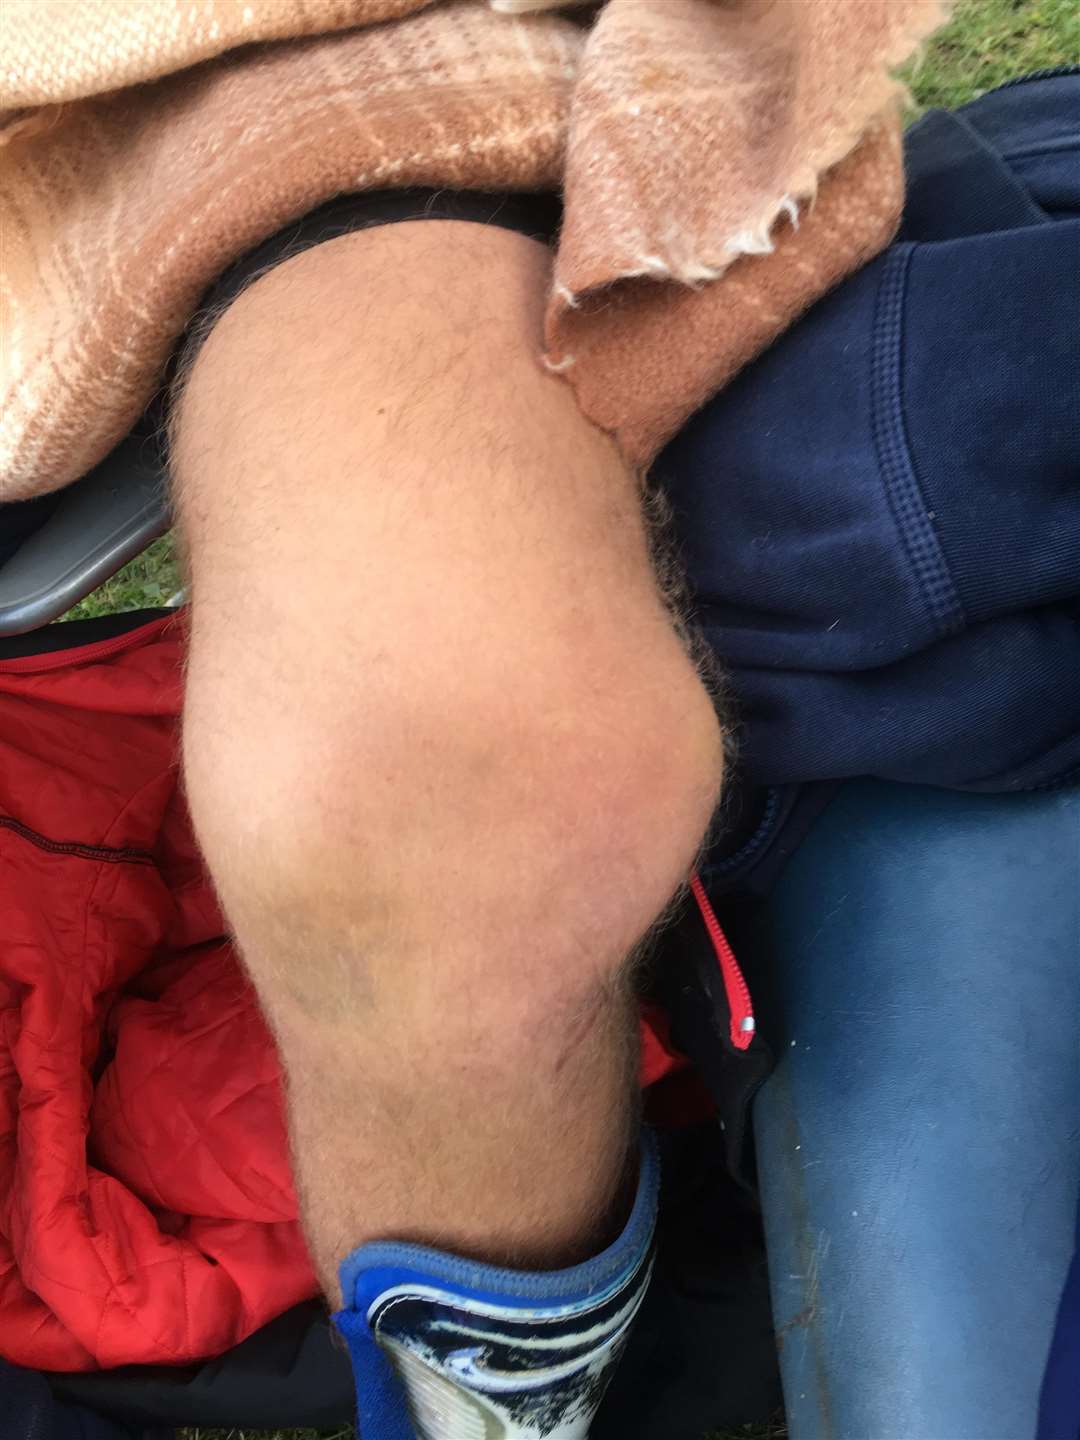 His knee is thought to be dislocated (5190915)